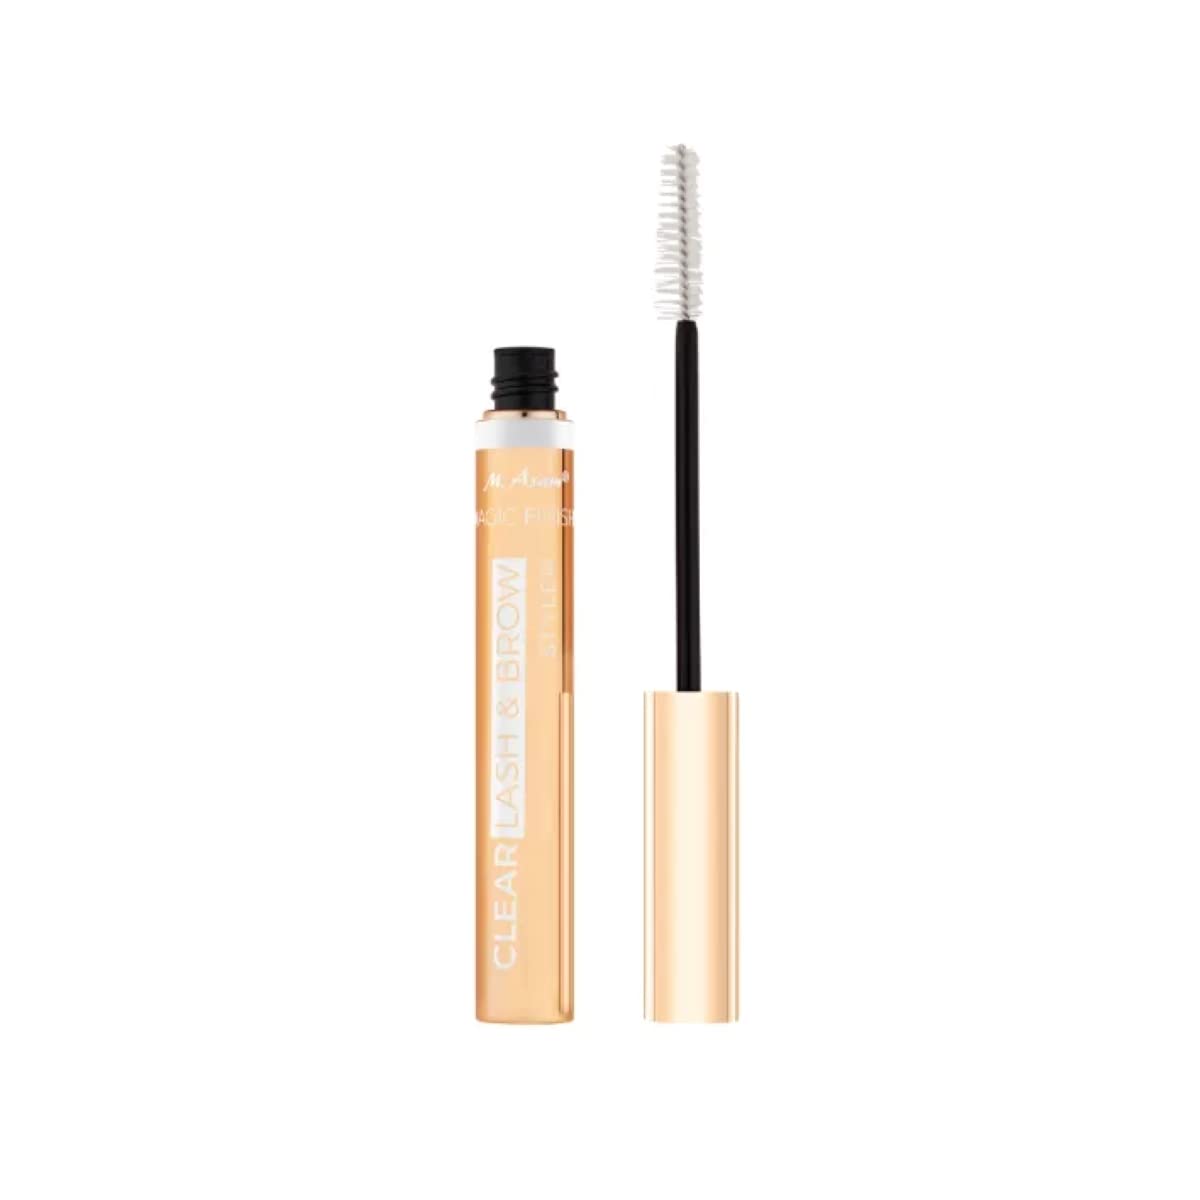 M. Asam MAGIC FINISH CLEAR LASH & BROW STYLER transparent - Colorless gel for perfect eyelashes & eyebrows, as primer & topcoat for better mascara hold, with caffeine, eye makeup, 0.23